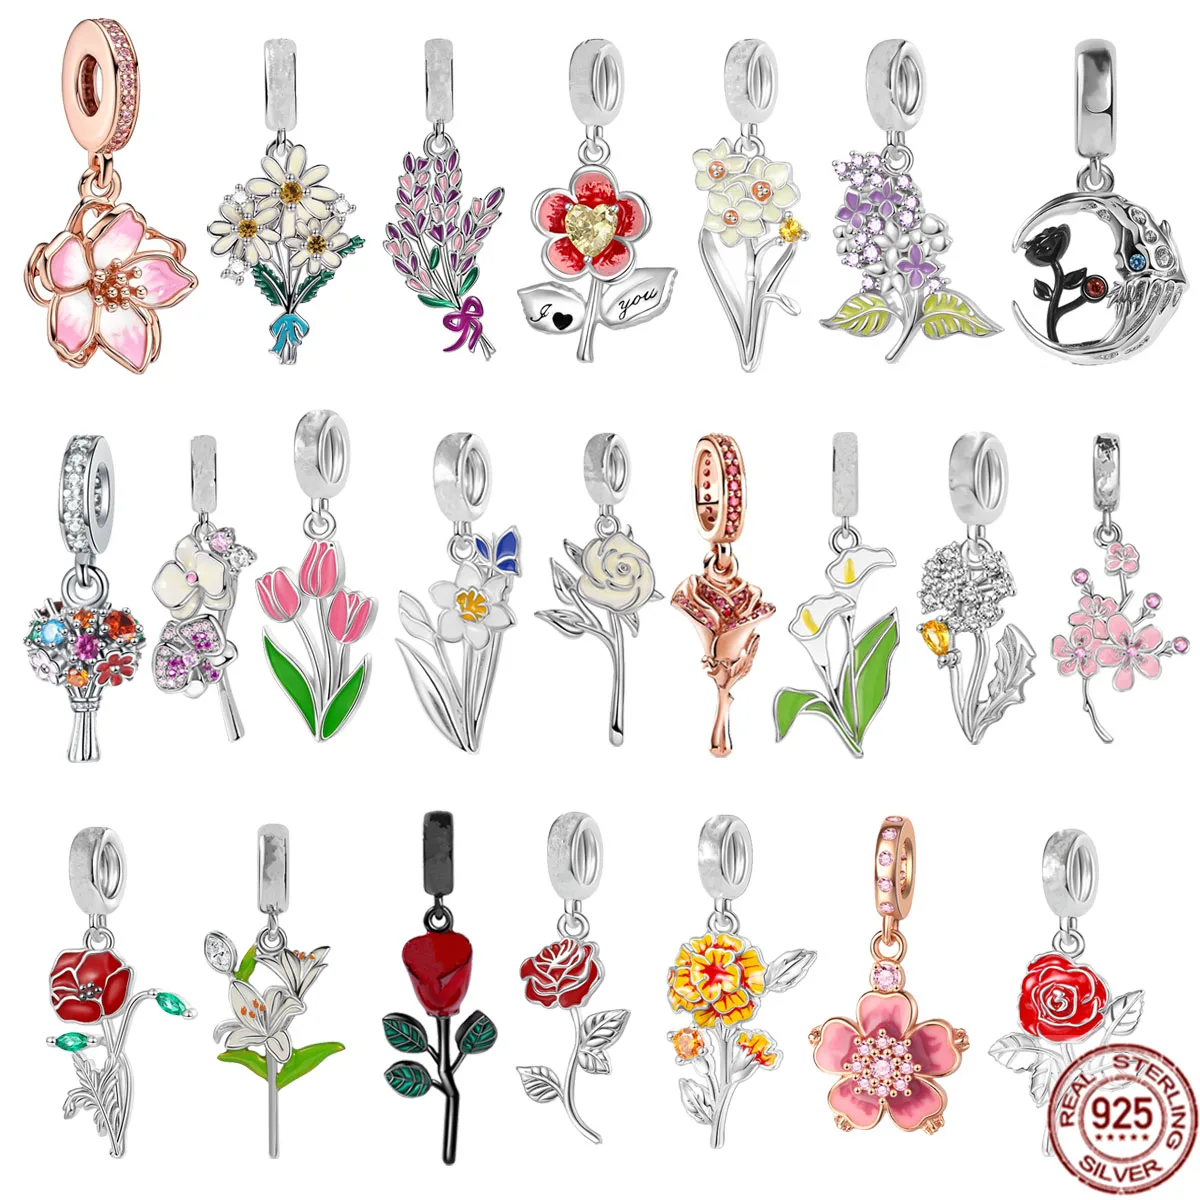 

Rose Tulip Lilac Lavender Daisy Moth Orchid Flower Dangle Charms Beads 925 Sterling Silver Fit Original Pandora Bracelet Jewelry